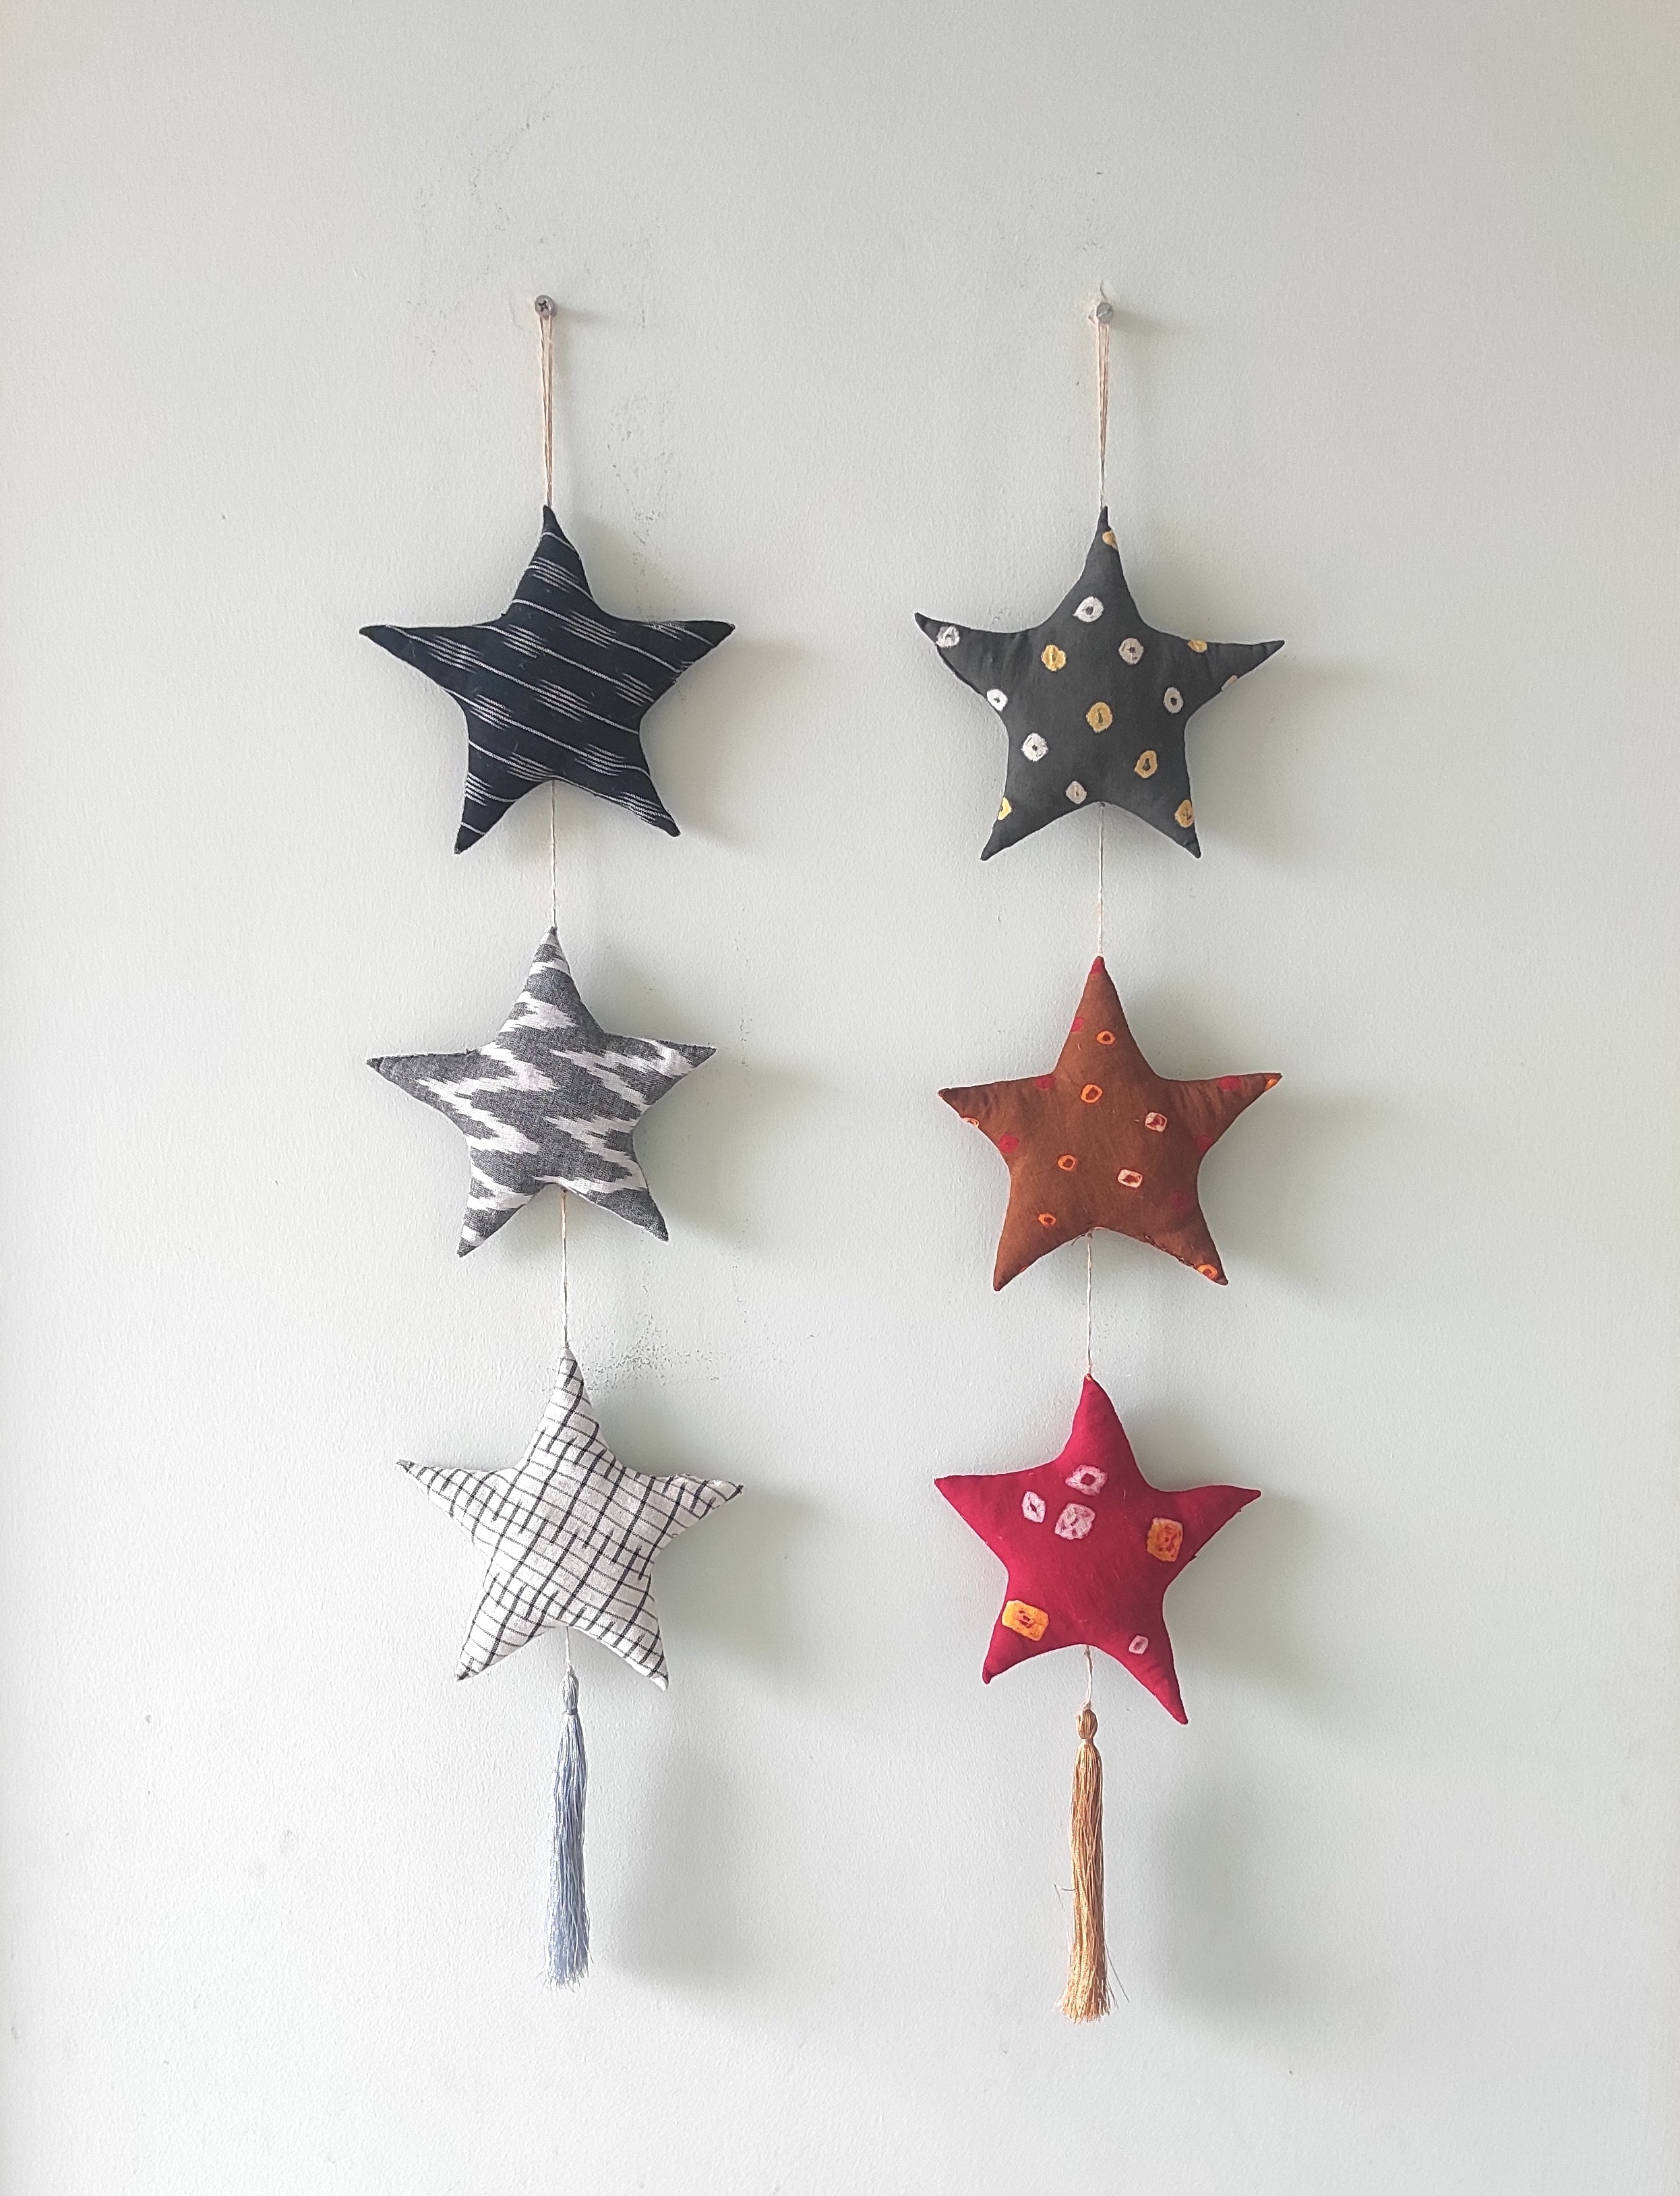 3 Stuffed Fabric Stars in 3 Colors hang together, filled only with organic materials